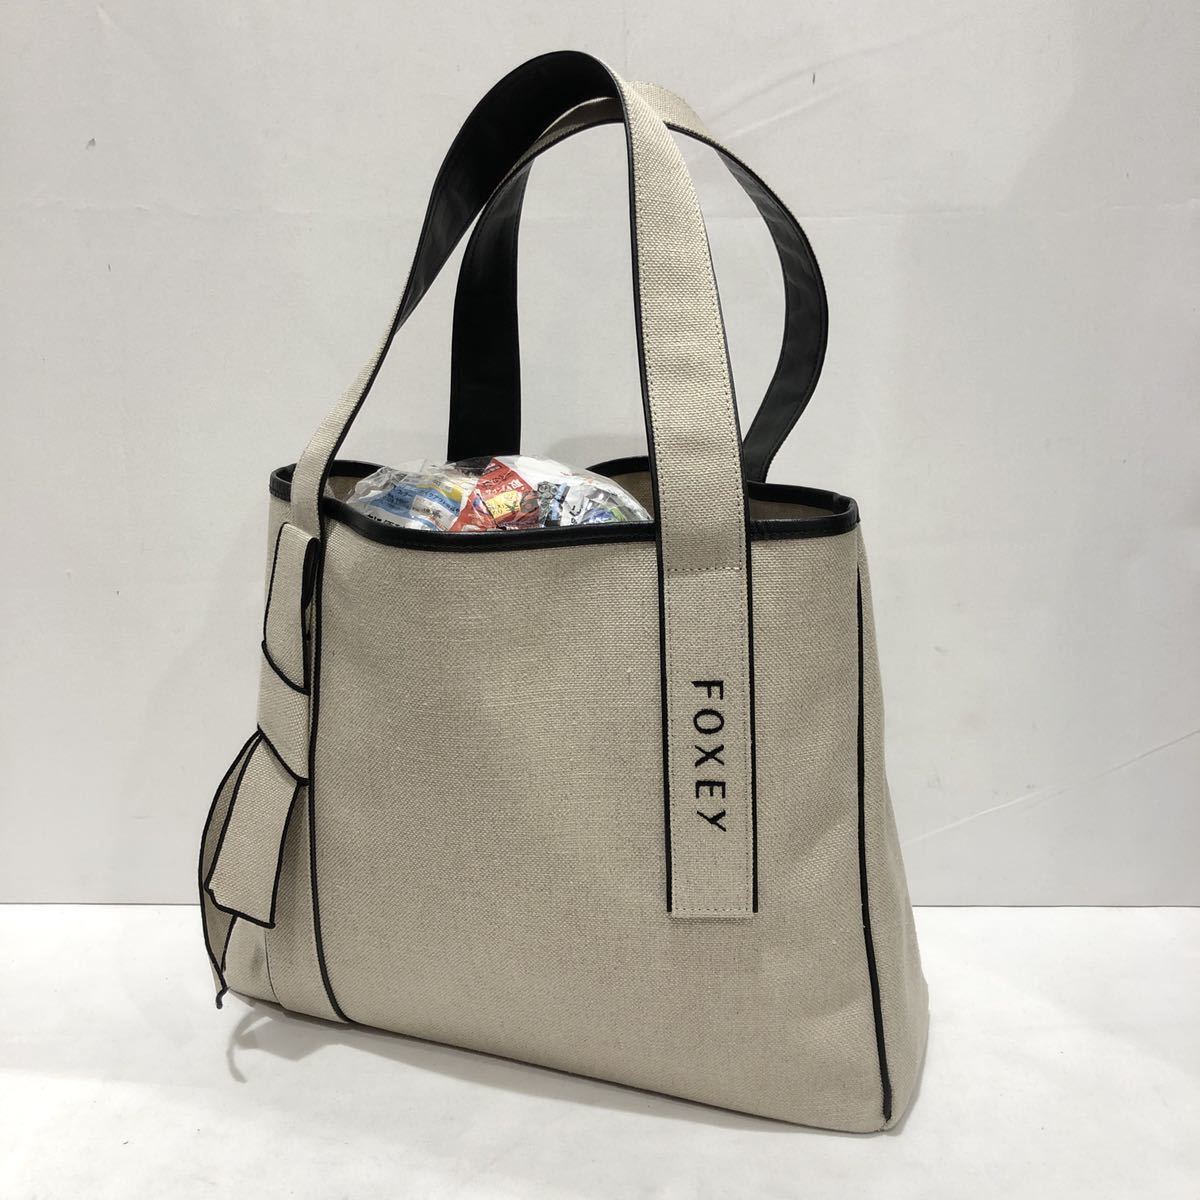 【FOXEY】Anytime Tote フォクシー トートバッグ アイボリー 無地 キャンバス ハンドバッグ 内ポケット ts202211